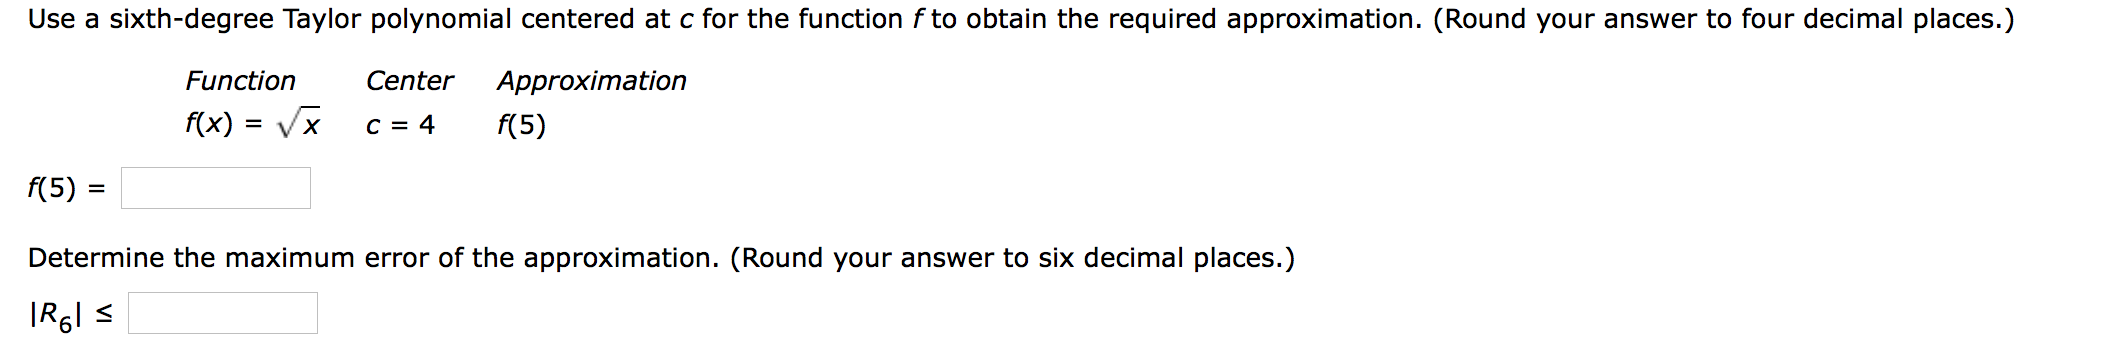 Use a sixth-degree Taylor polynomial centered at c for the function f to obtain the required approximation. (Round your answer to four decimal places.)
Function
Center
Approximation
f(x) = Vx
C = 4
f(5)
f(5)
Determine the maximum error of the approximation. (Round your answer to six decimal places.)
